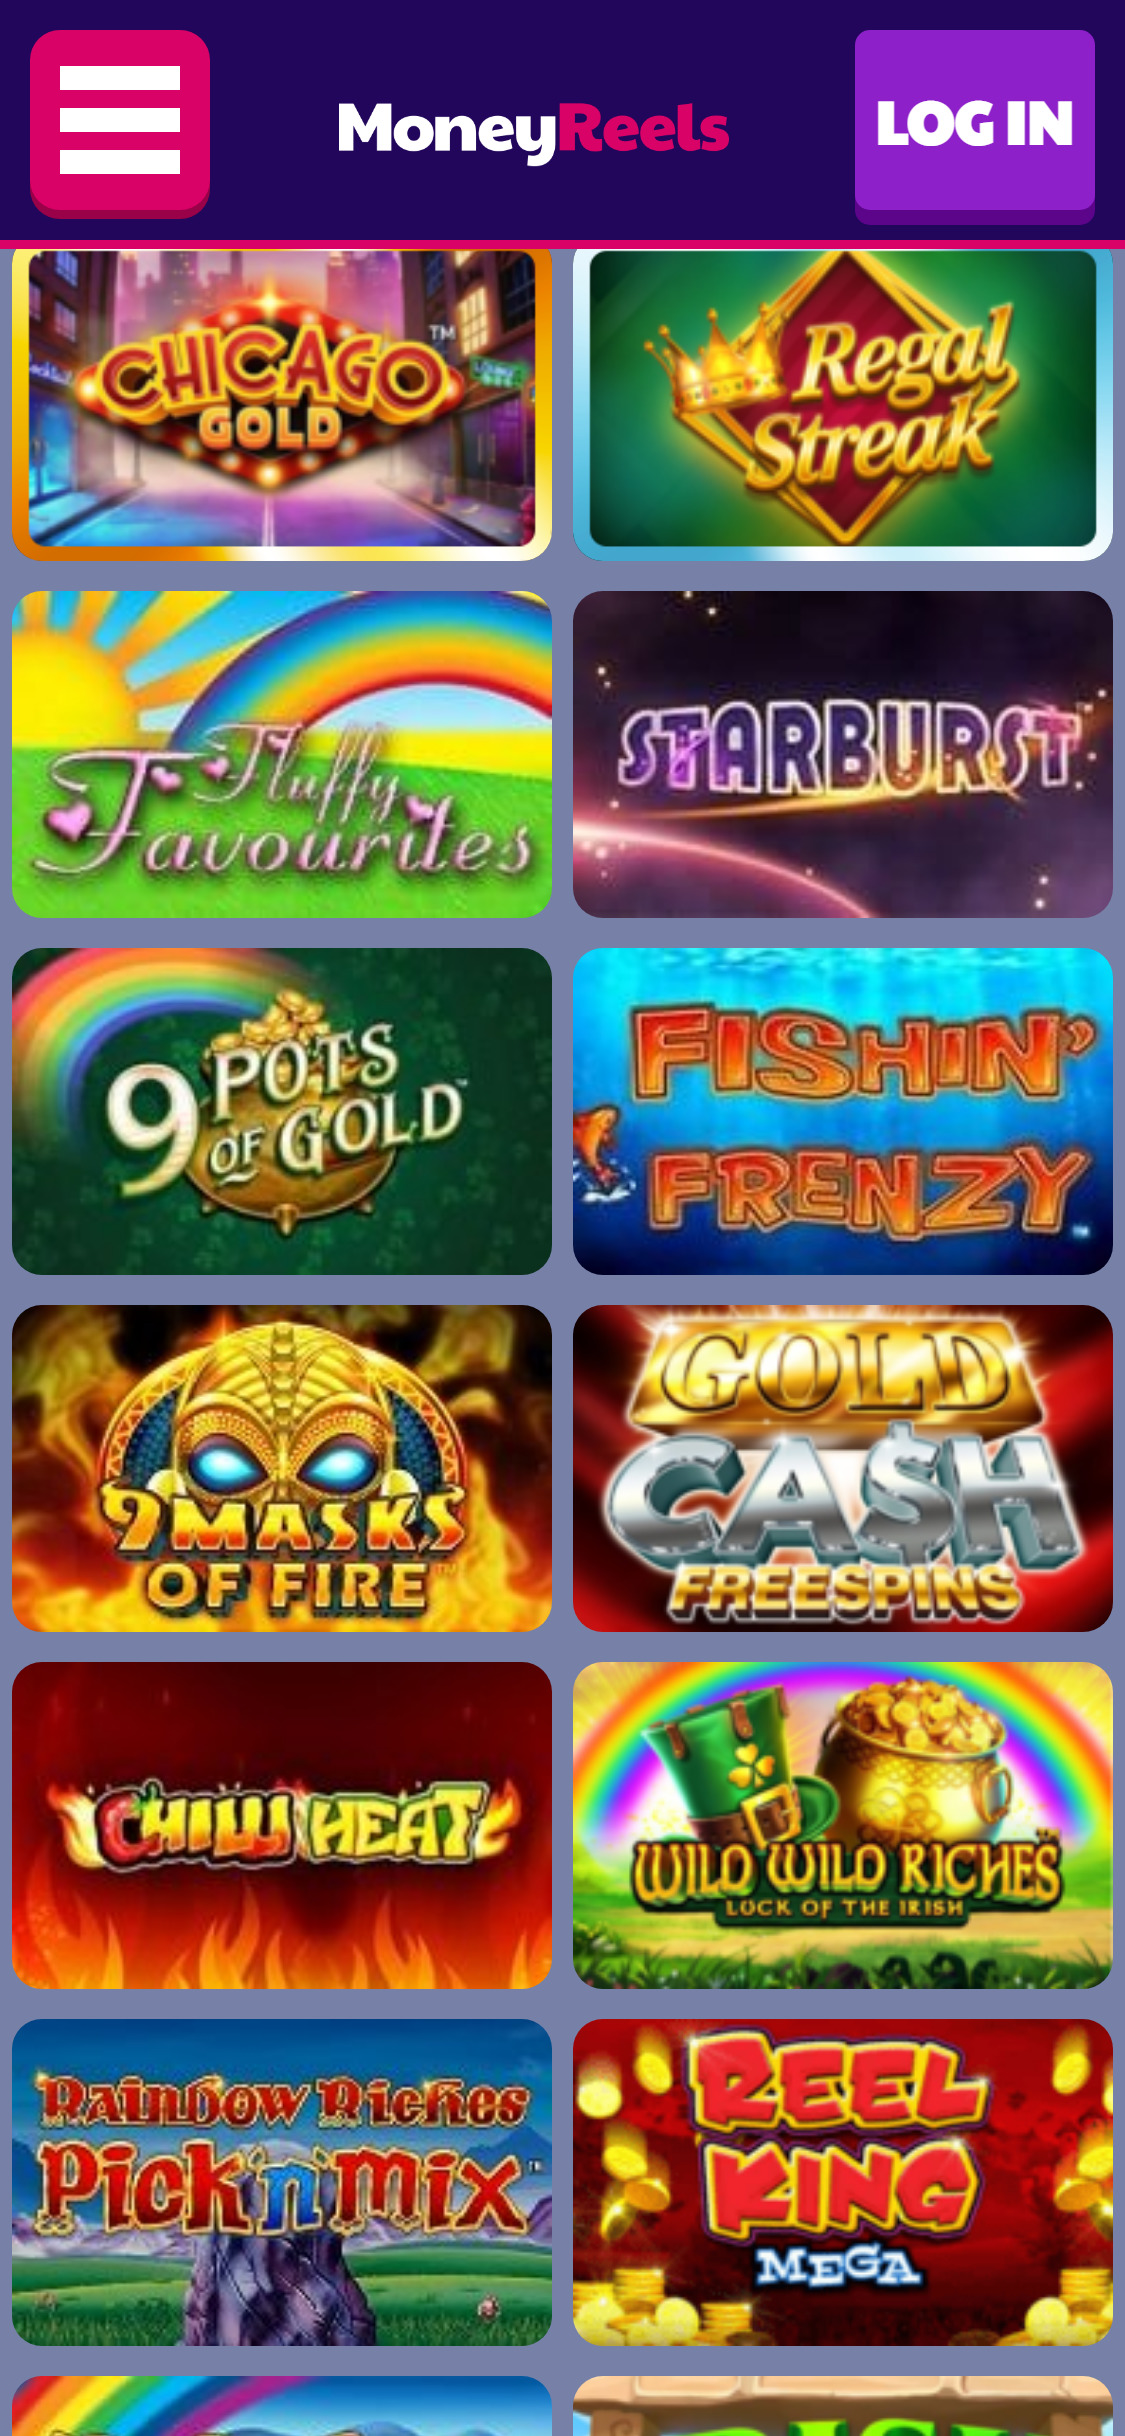 Money Reels Casino Mobile Games Review